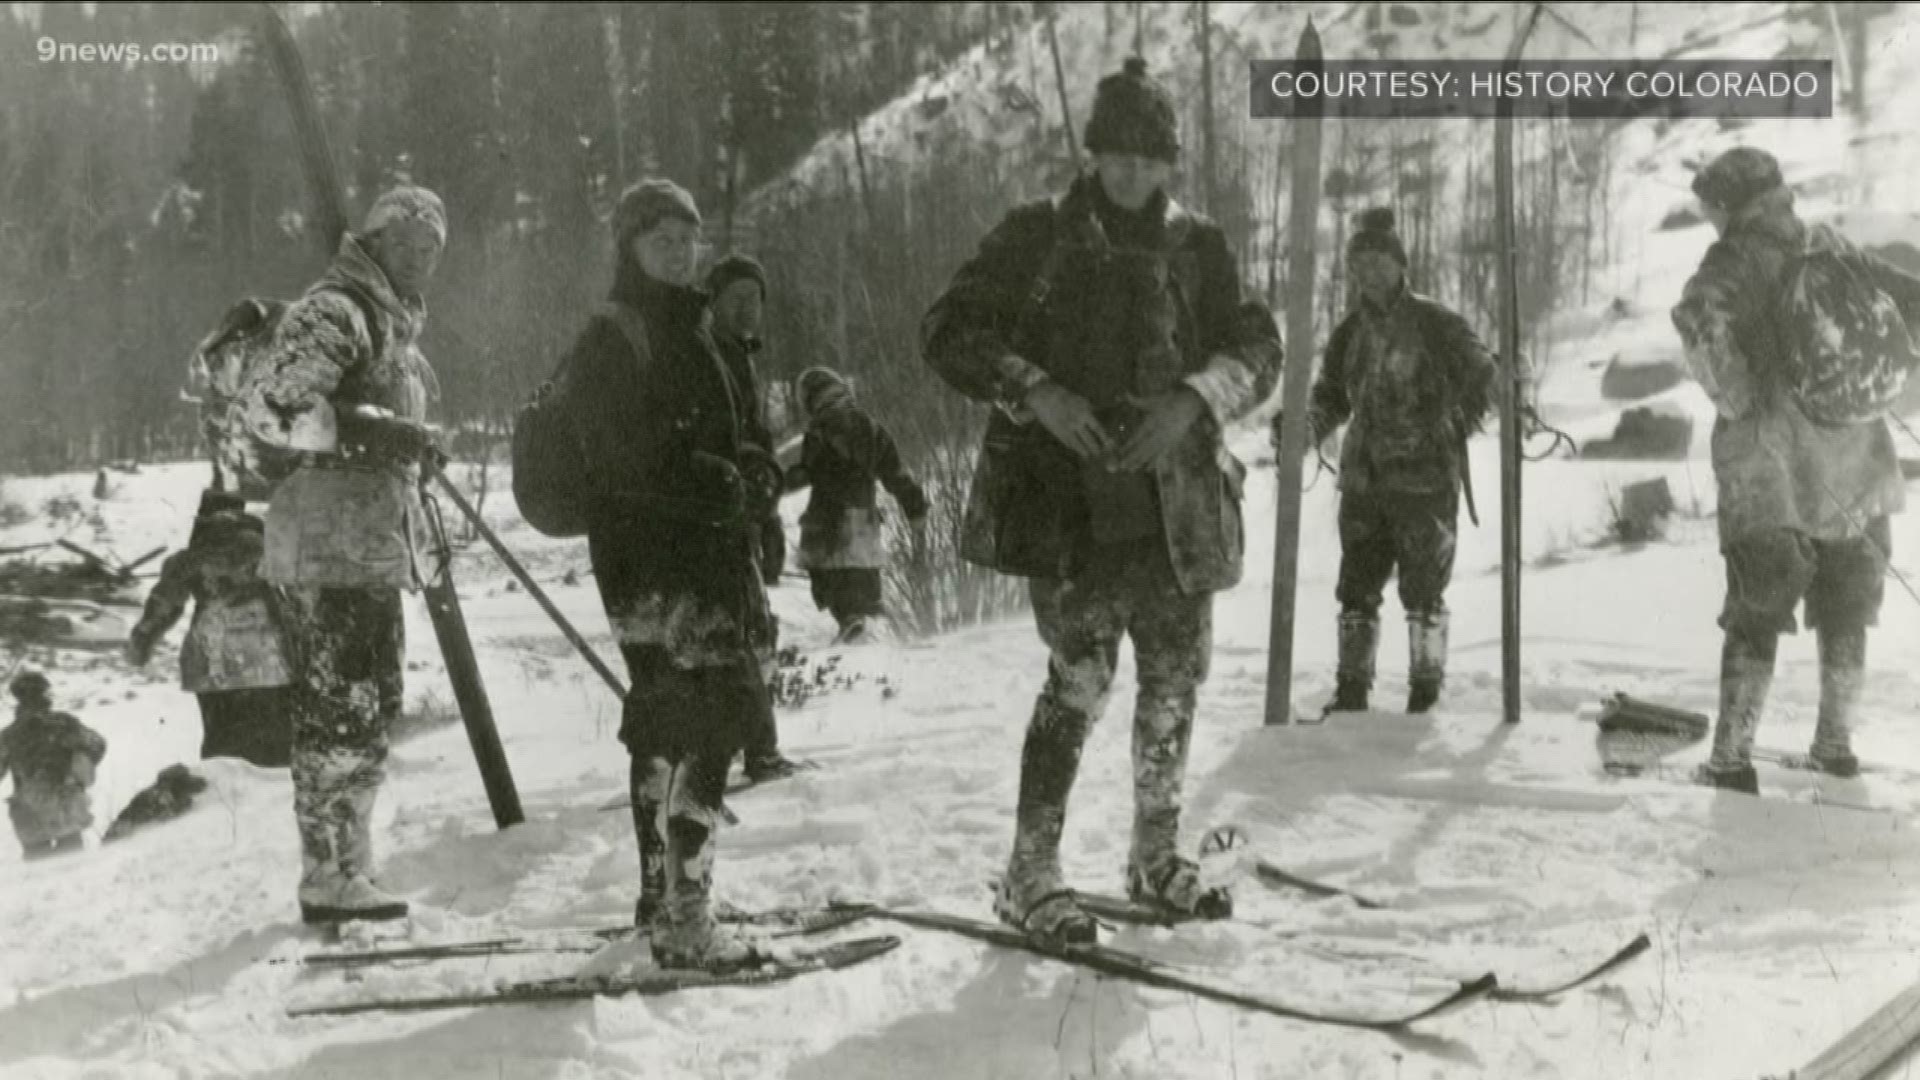 Before the days of the six-person chair lift and covered gondola, Colorado skiers had to find their own way up the mountain.